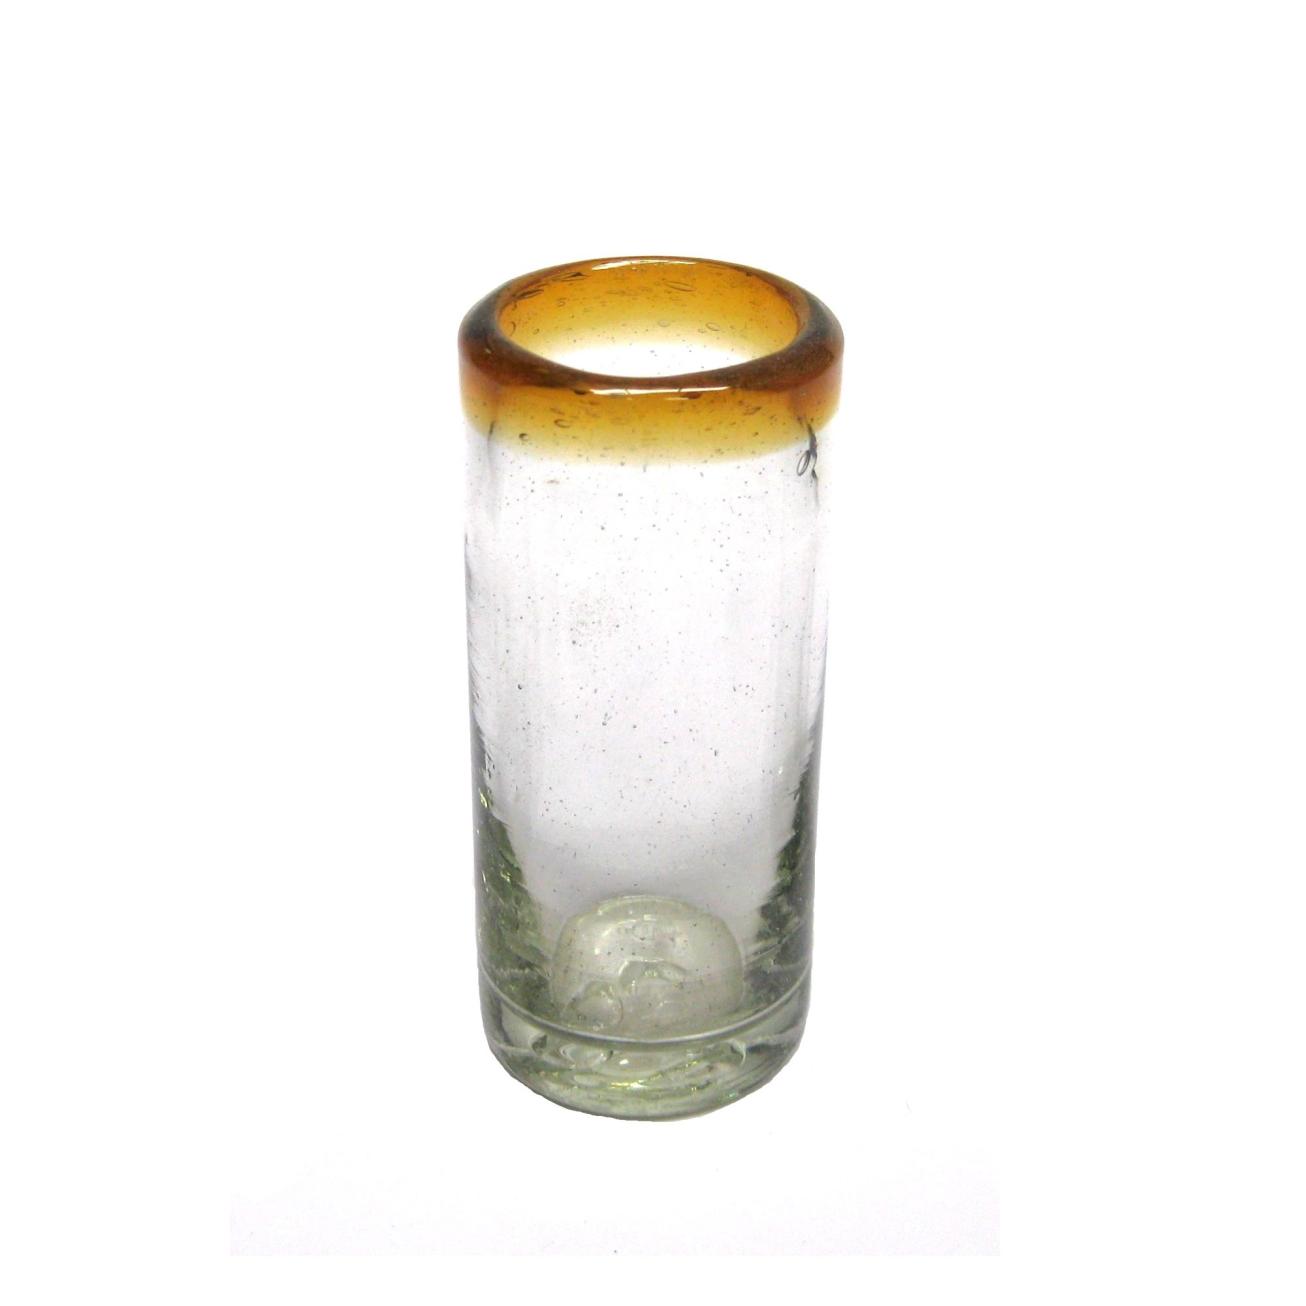 Tequila Shot Glasses / Amber Rim 2 oz Tequila Shot Glasses (set of 6) / These shot glasses bordered in amber color are perfect for sipping your favourite tequila or any other liquor.